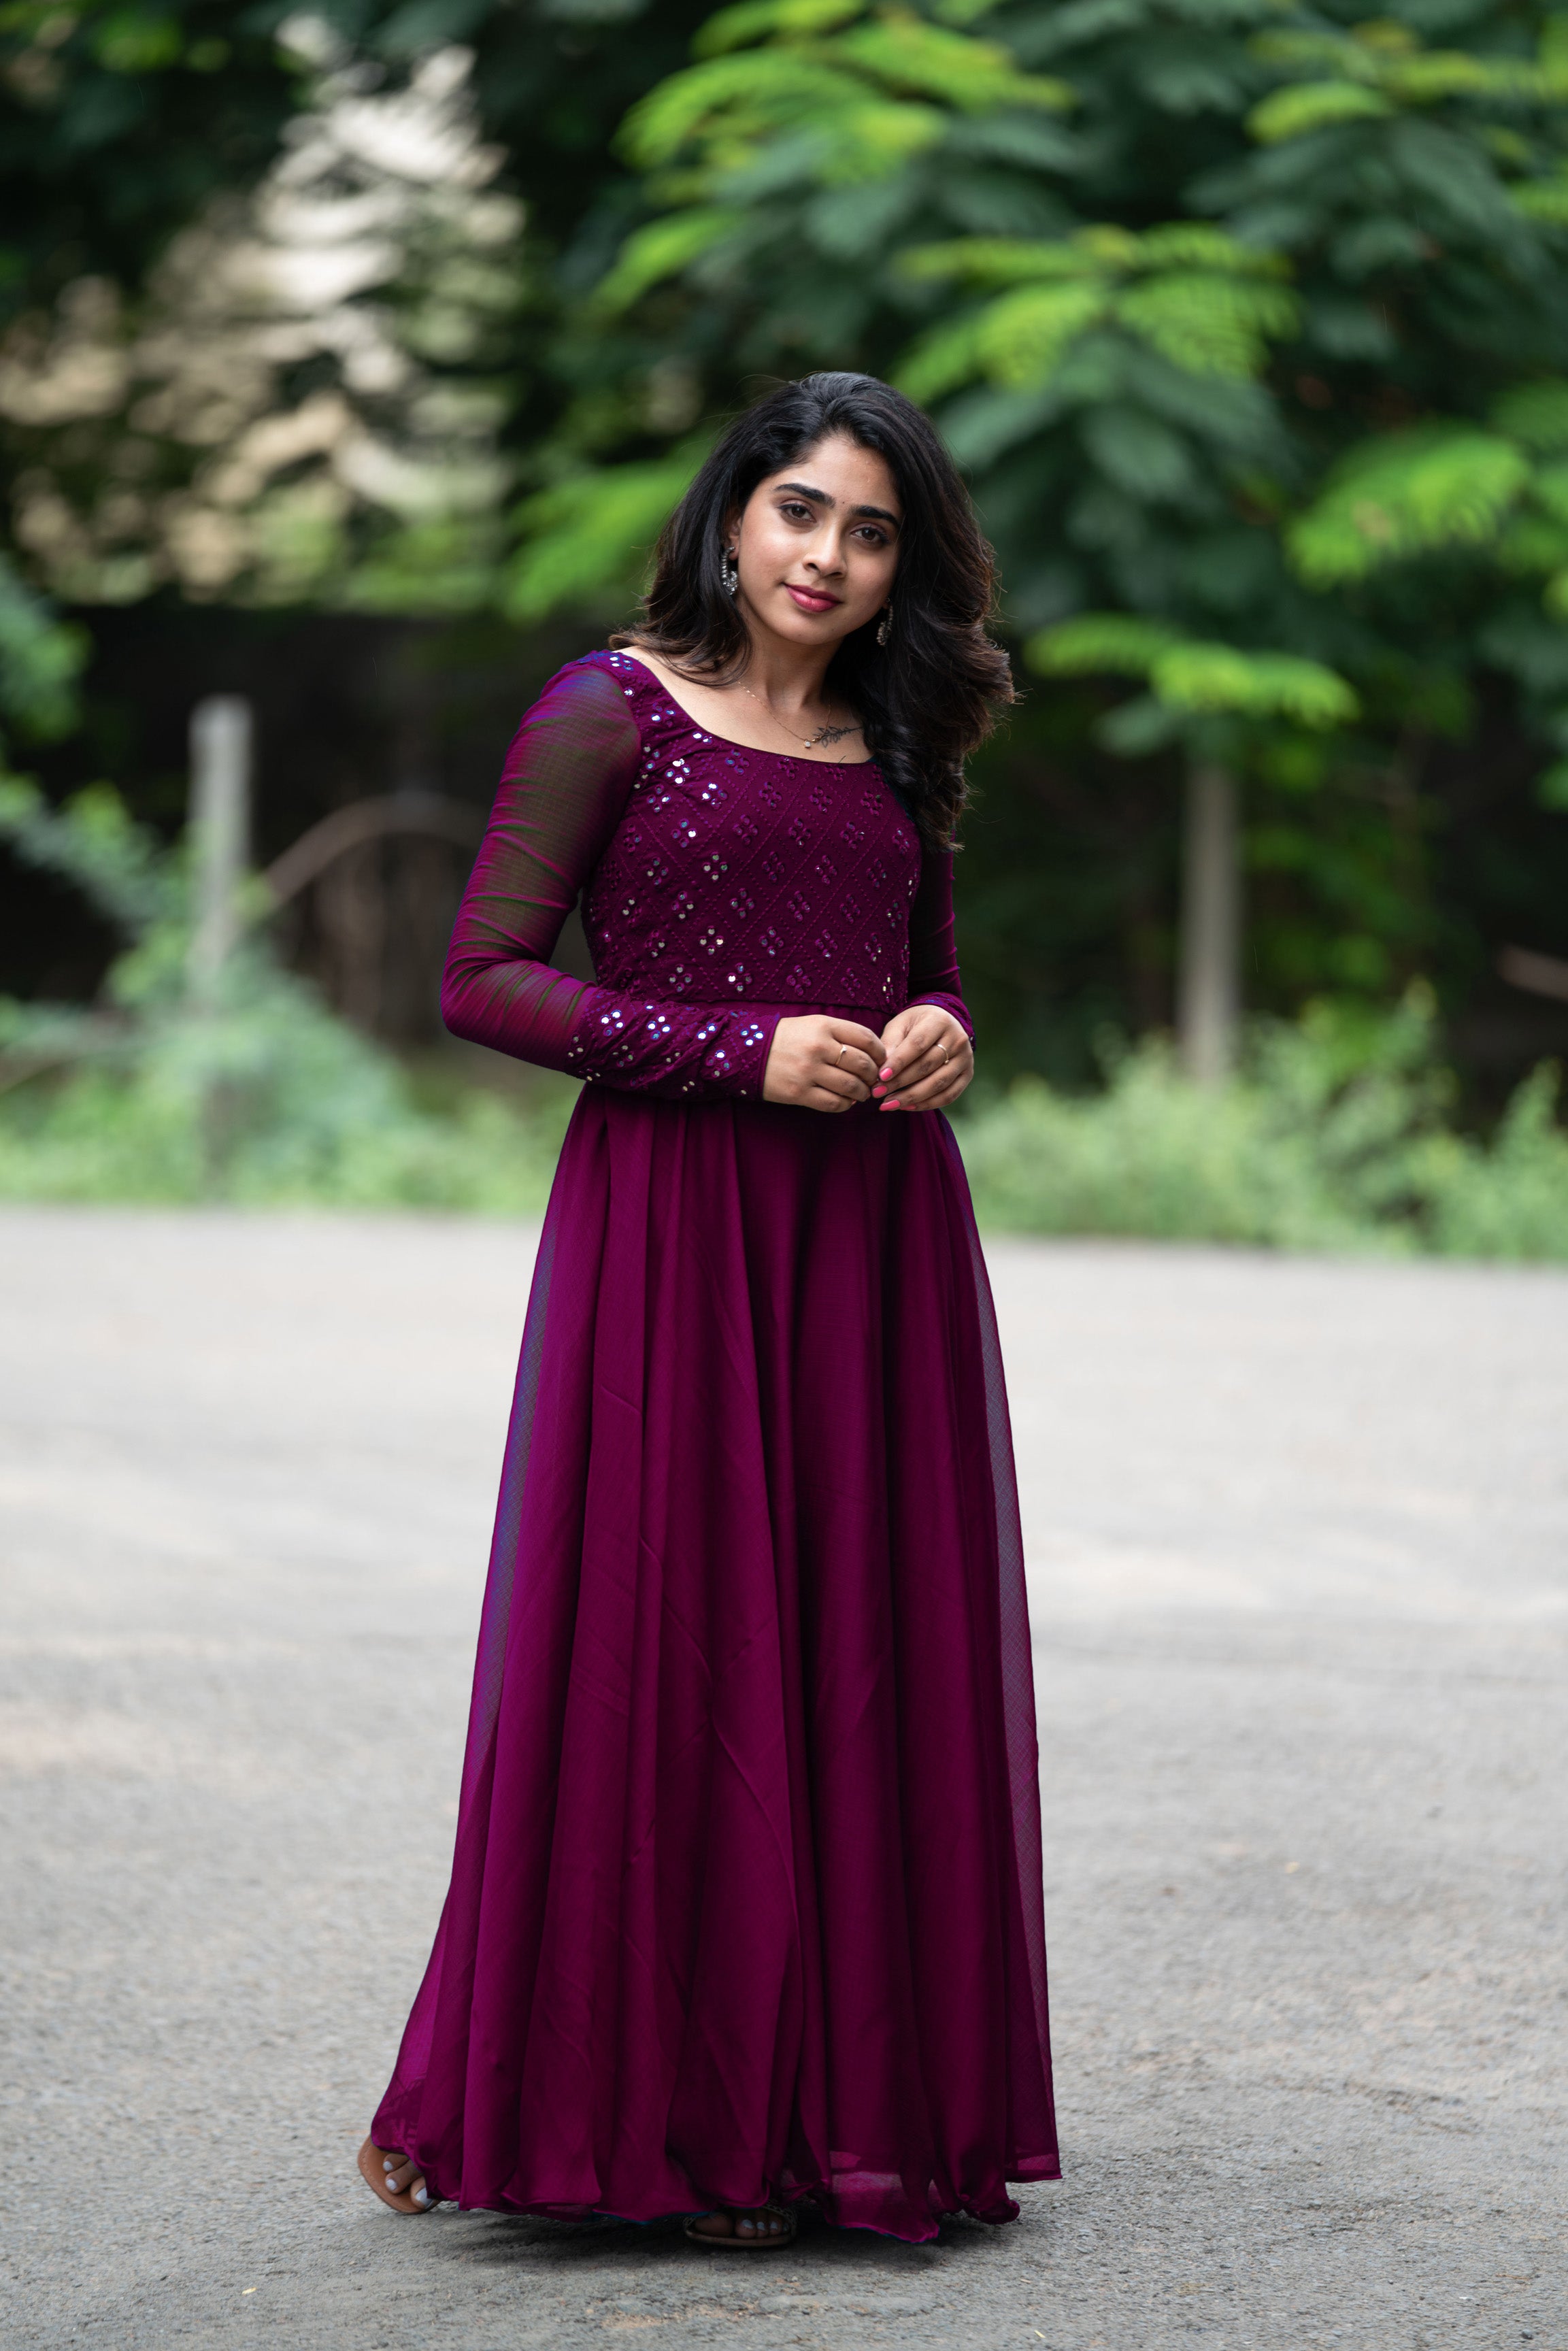 Choose from a variety of gorgeous georgette maxi dresses and anarkali suits - perfect for weddings, bridesmaids, or any special occasion! Indo-Western designs and embroidery ensure you'll shine in any setting.